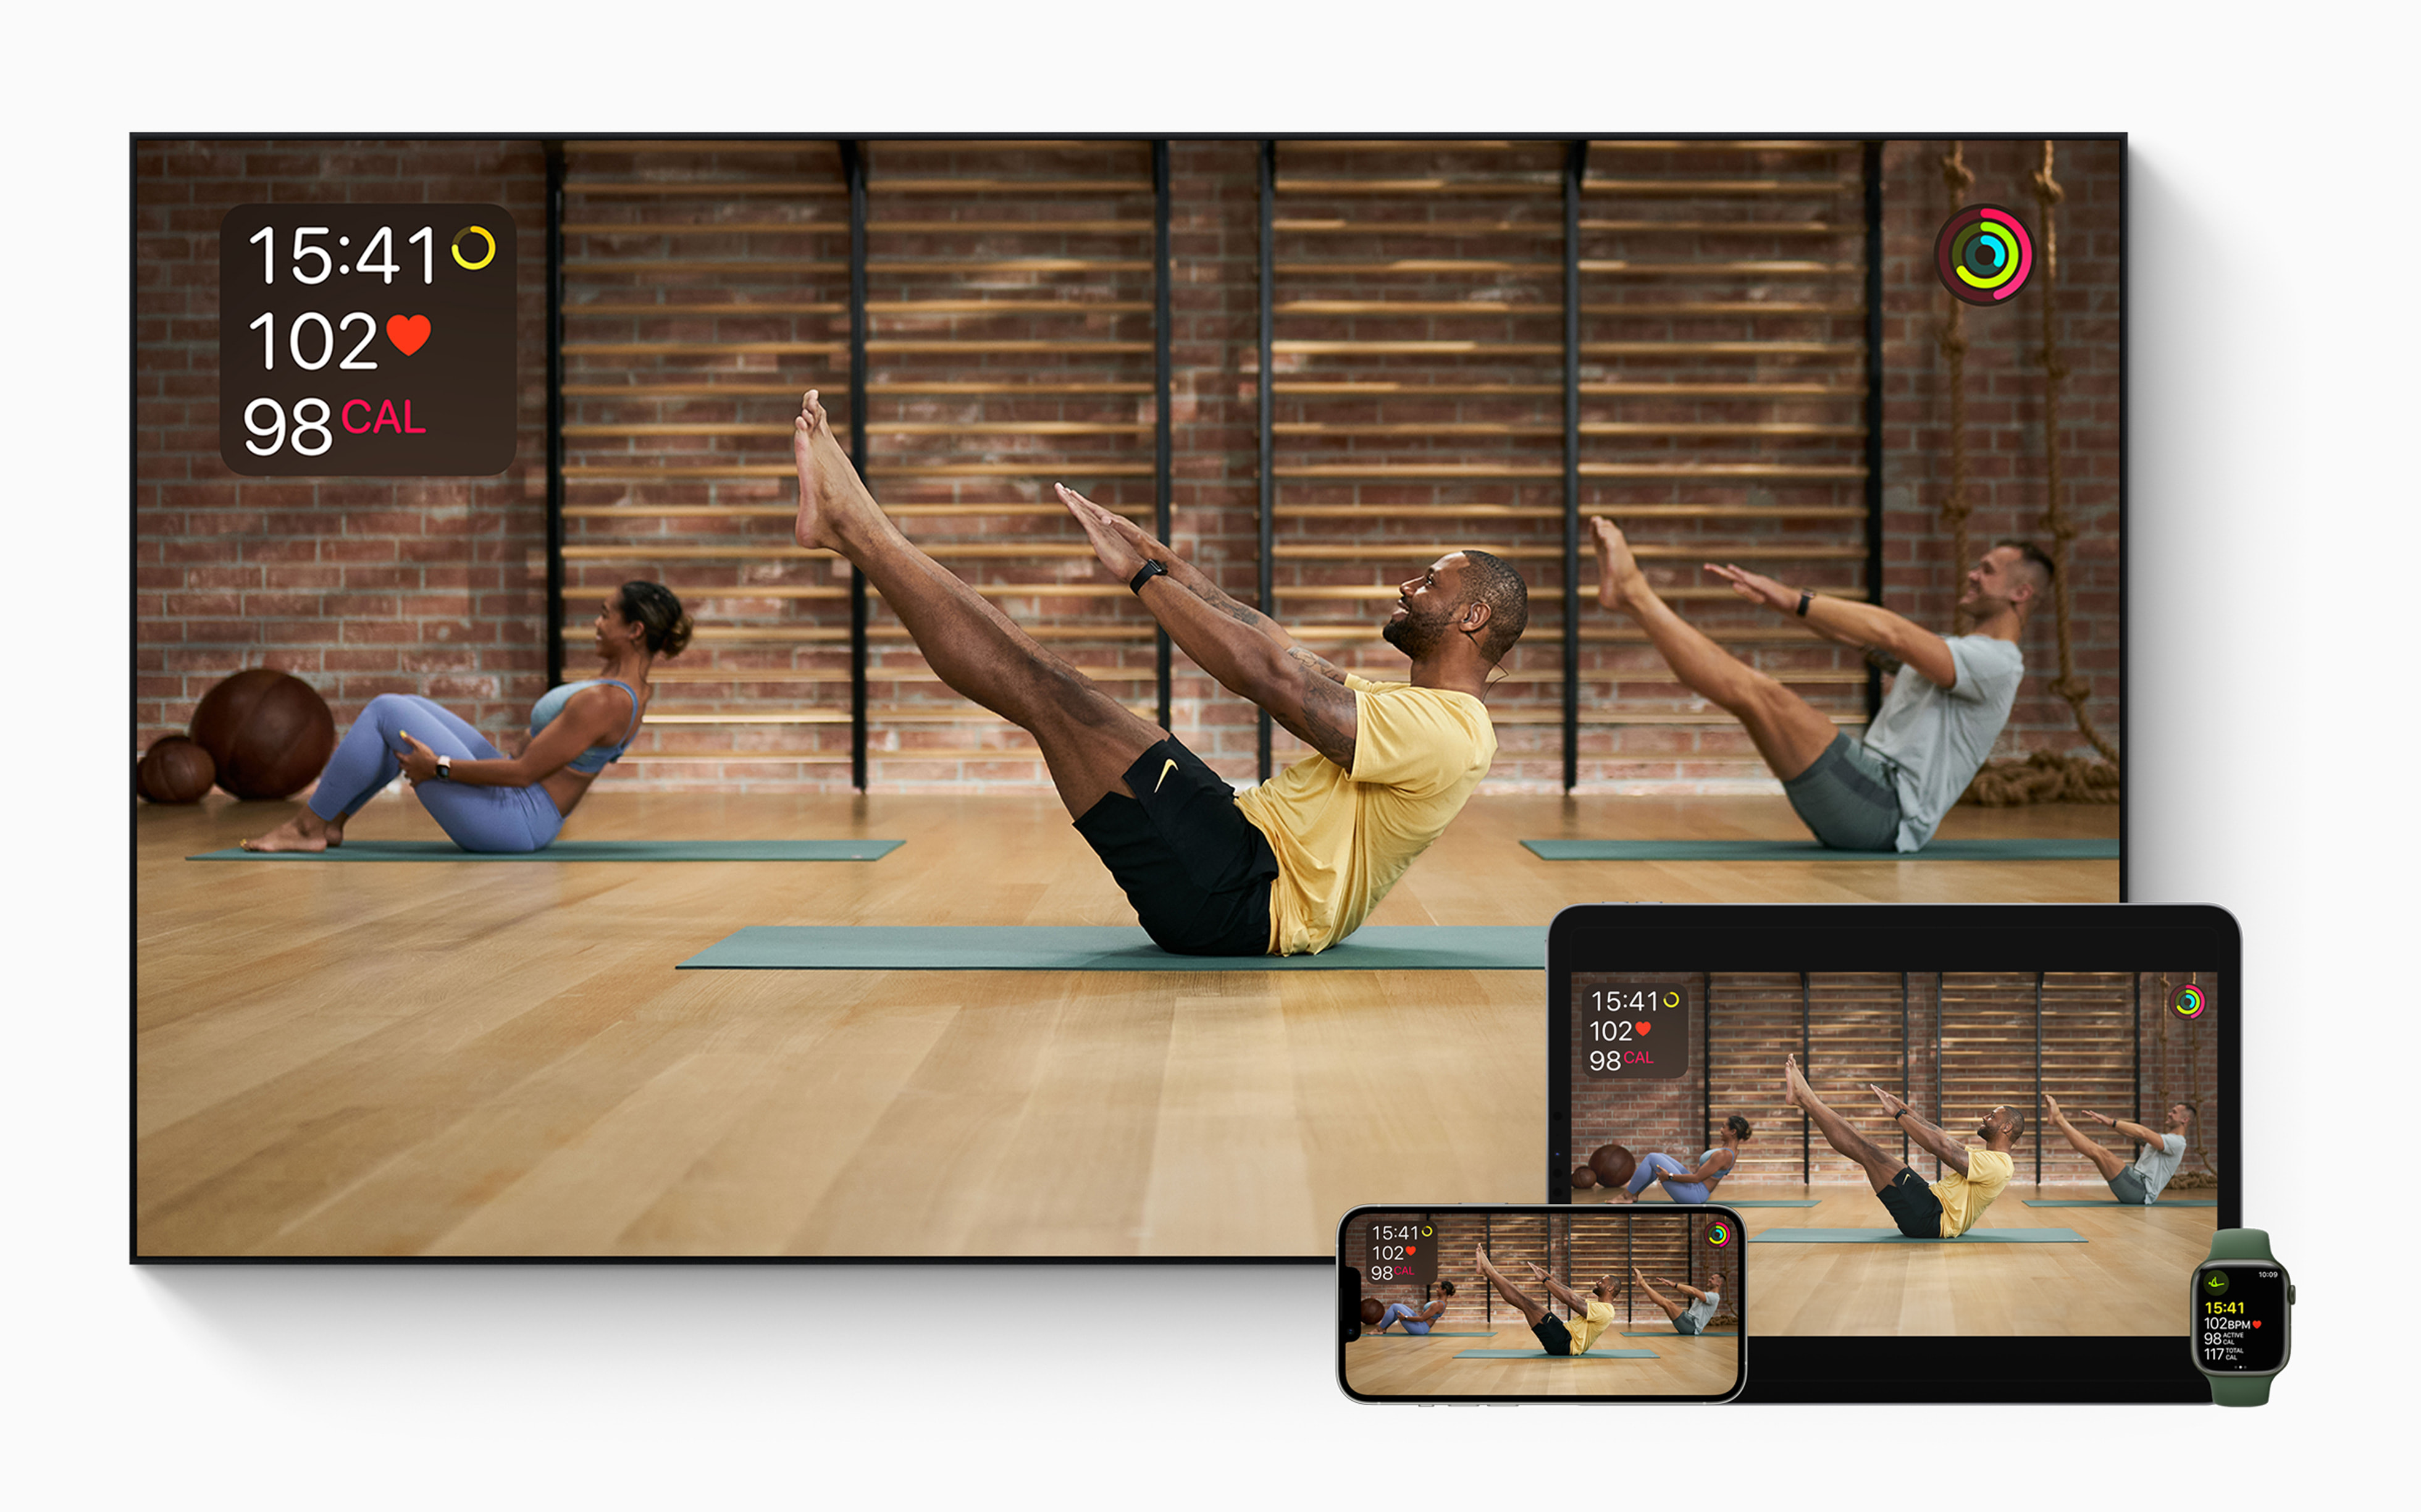 Apple Fitness+ is coming to 15 new countries on November 3 - Apple (SA)